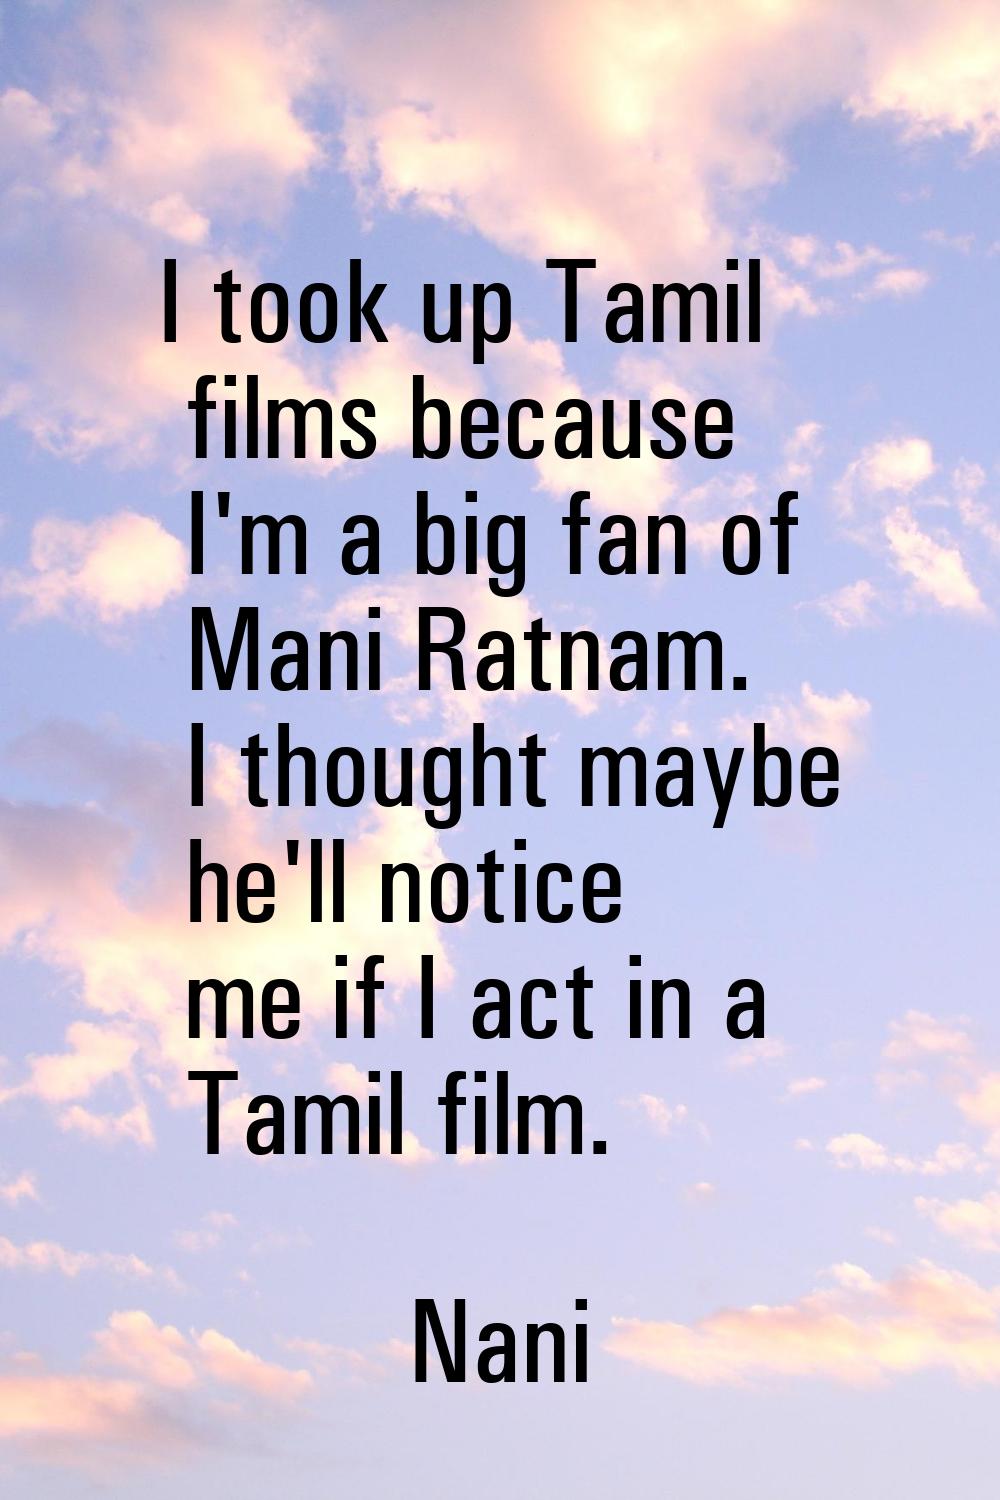 I took up Tamil films because I'm a big fan of Mani Ratnam. I thought maybe he'll notice me if I ac